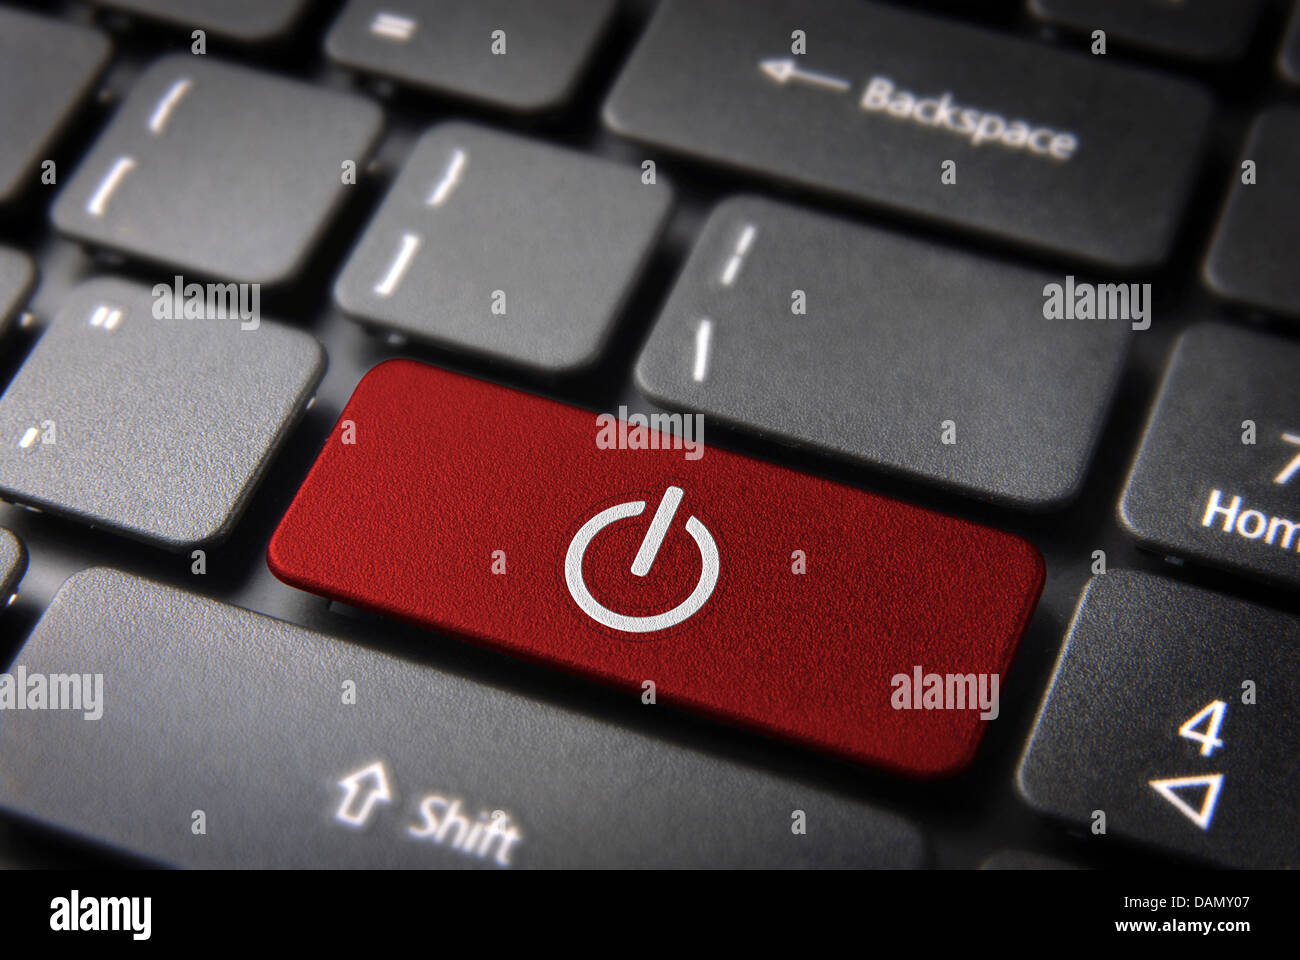 Power key with switch off icon on laptop keyboard. Included clipping path, so you can easily edit it. Stock Photo